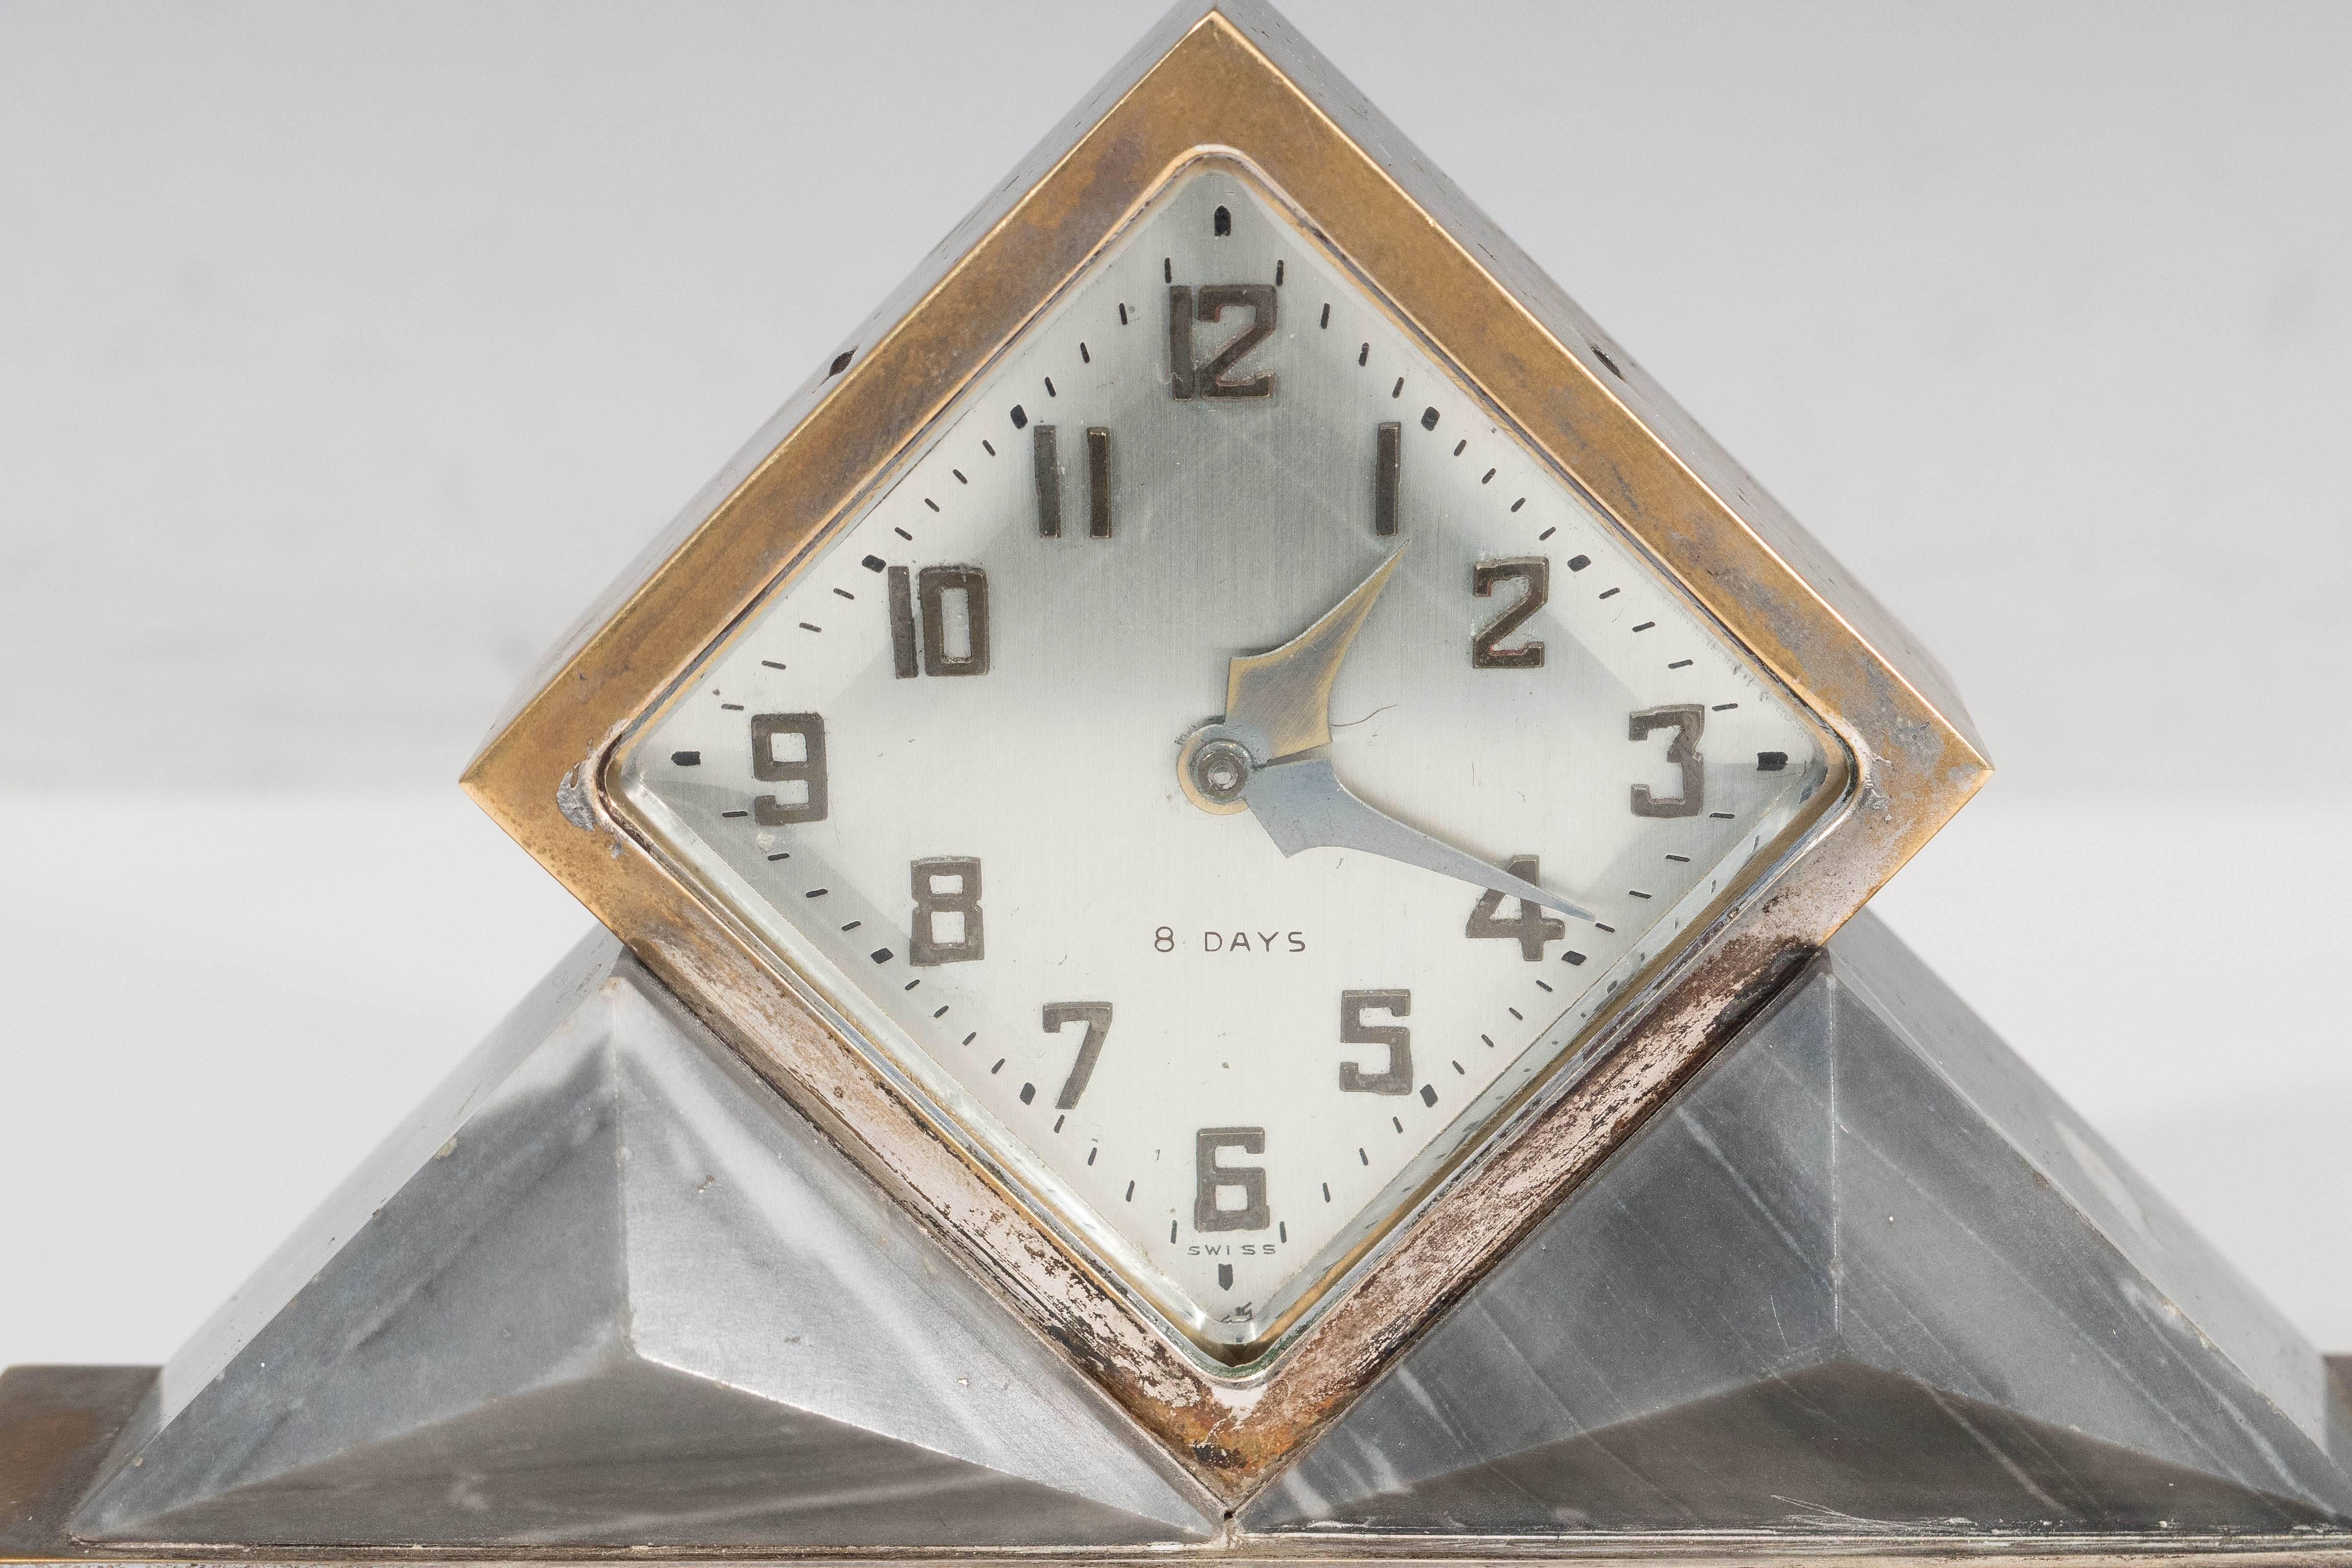 A vintage 8-day mantel clock, designed in the Art Deco taste by Omega, produced circa 1920s, with Arabic numerals, the face set inside a diamond form frame, flanked by two faceted grey marble triangles as supports, on stepped base. Markings include